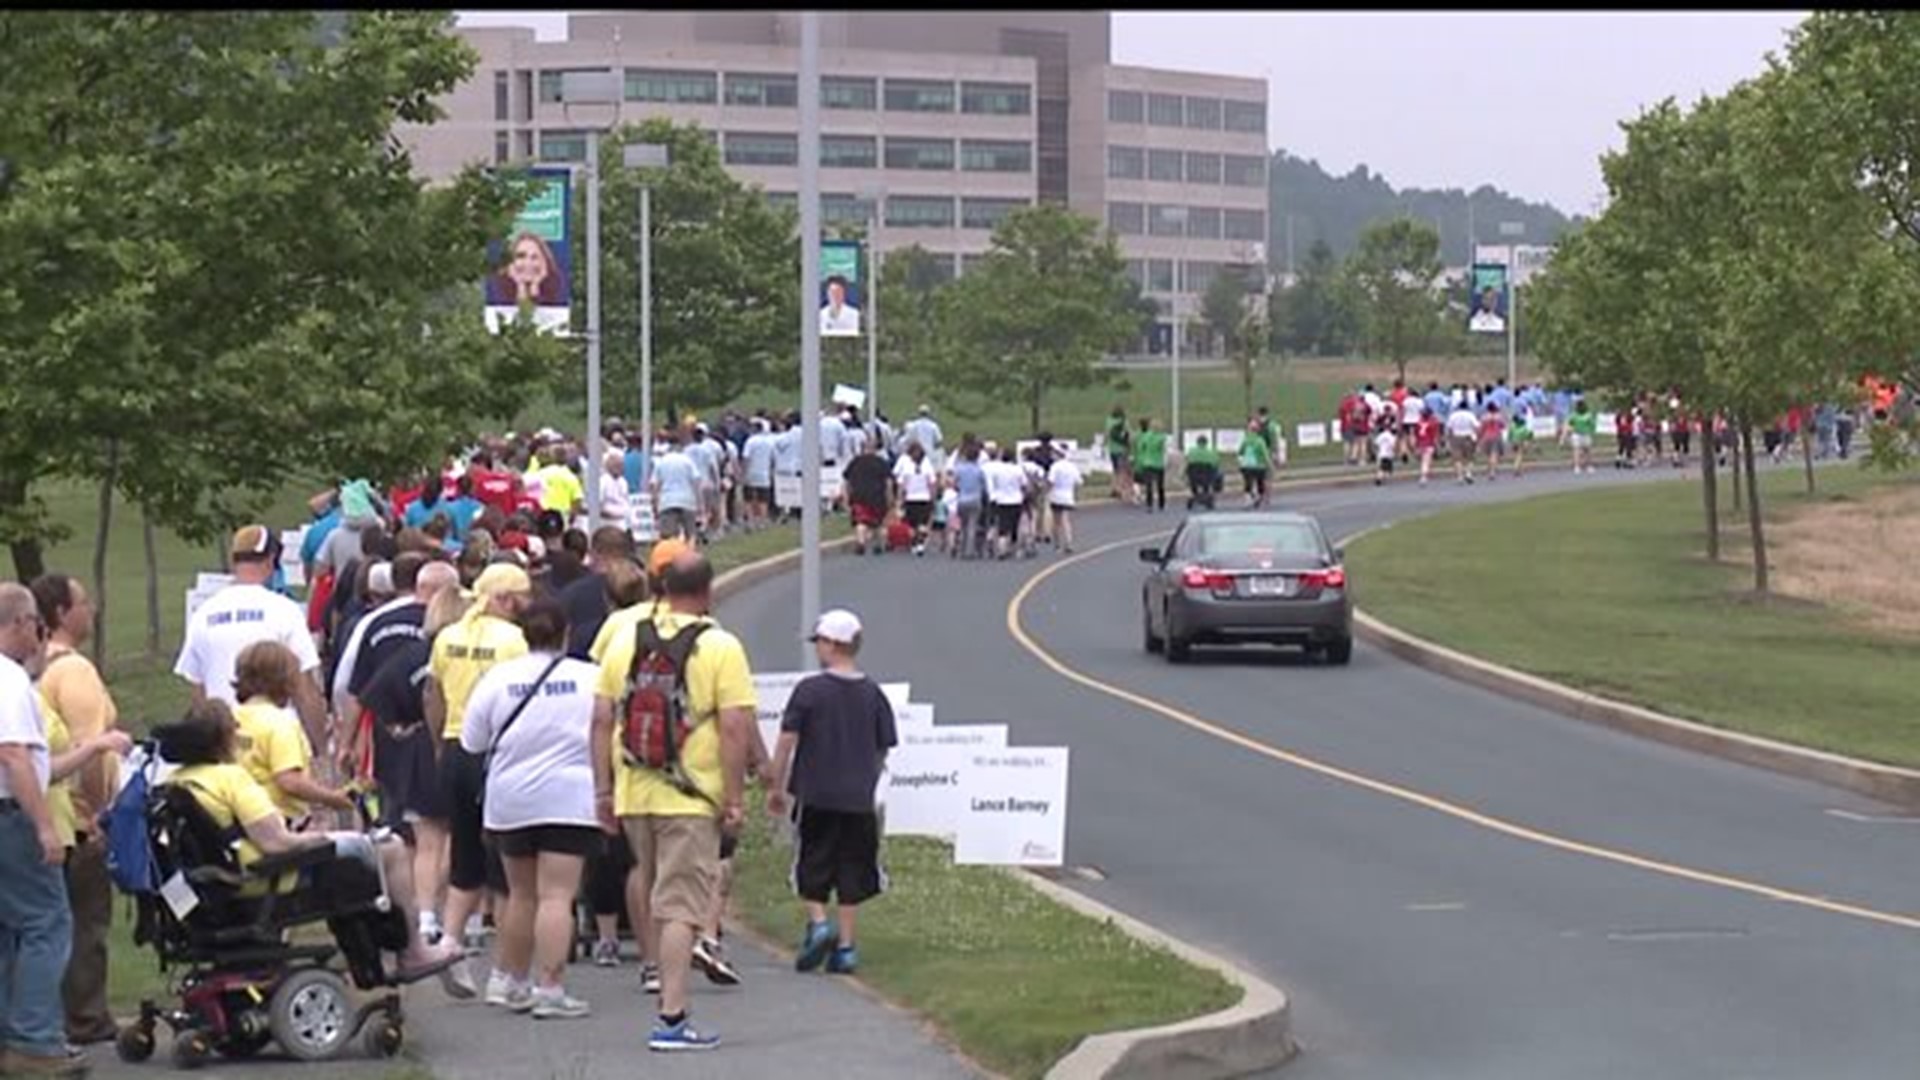 Patients with ALS and families walk to defeat disease in Dauphin County